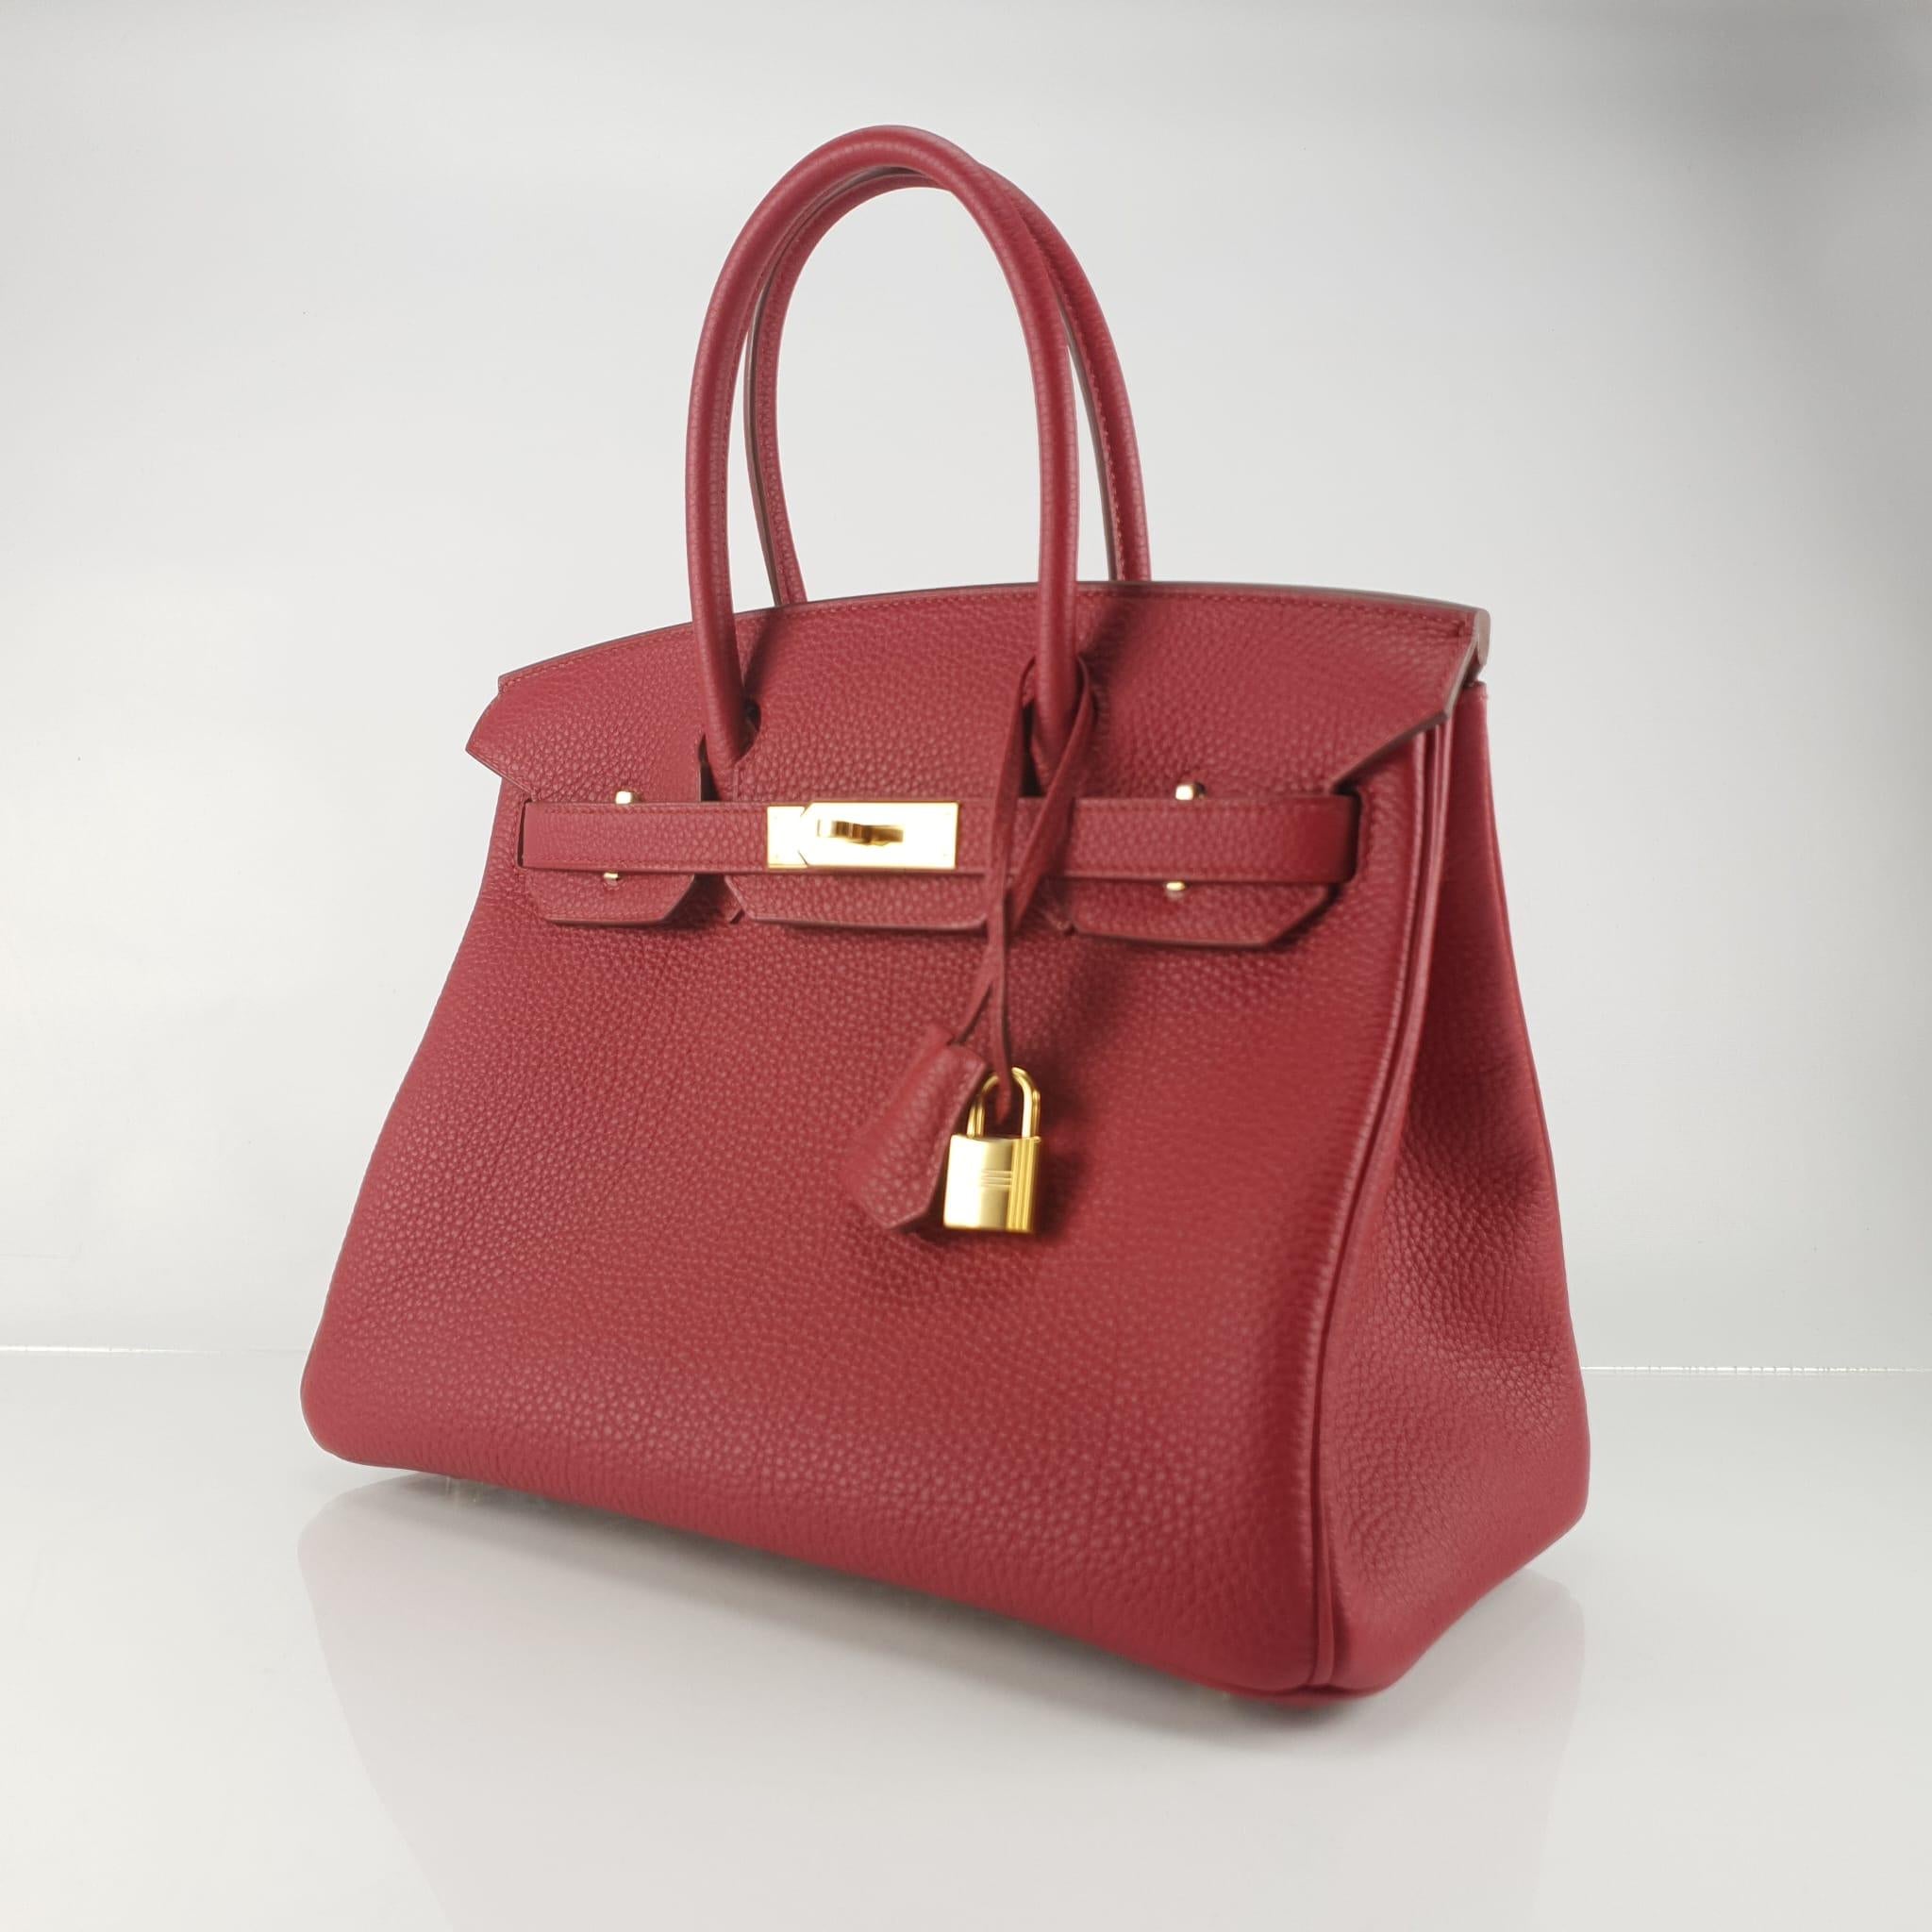 Classic Birkin rendered in Ruby red Togo leather and accented with gold-plated hardware. Togo leather is a thick and durable calfskin with a medium grain known for its resilience to scratches and ability to be repaired easily. Includes lock, two